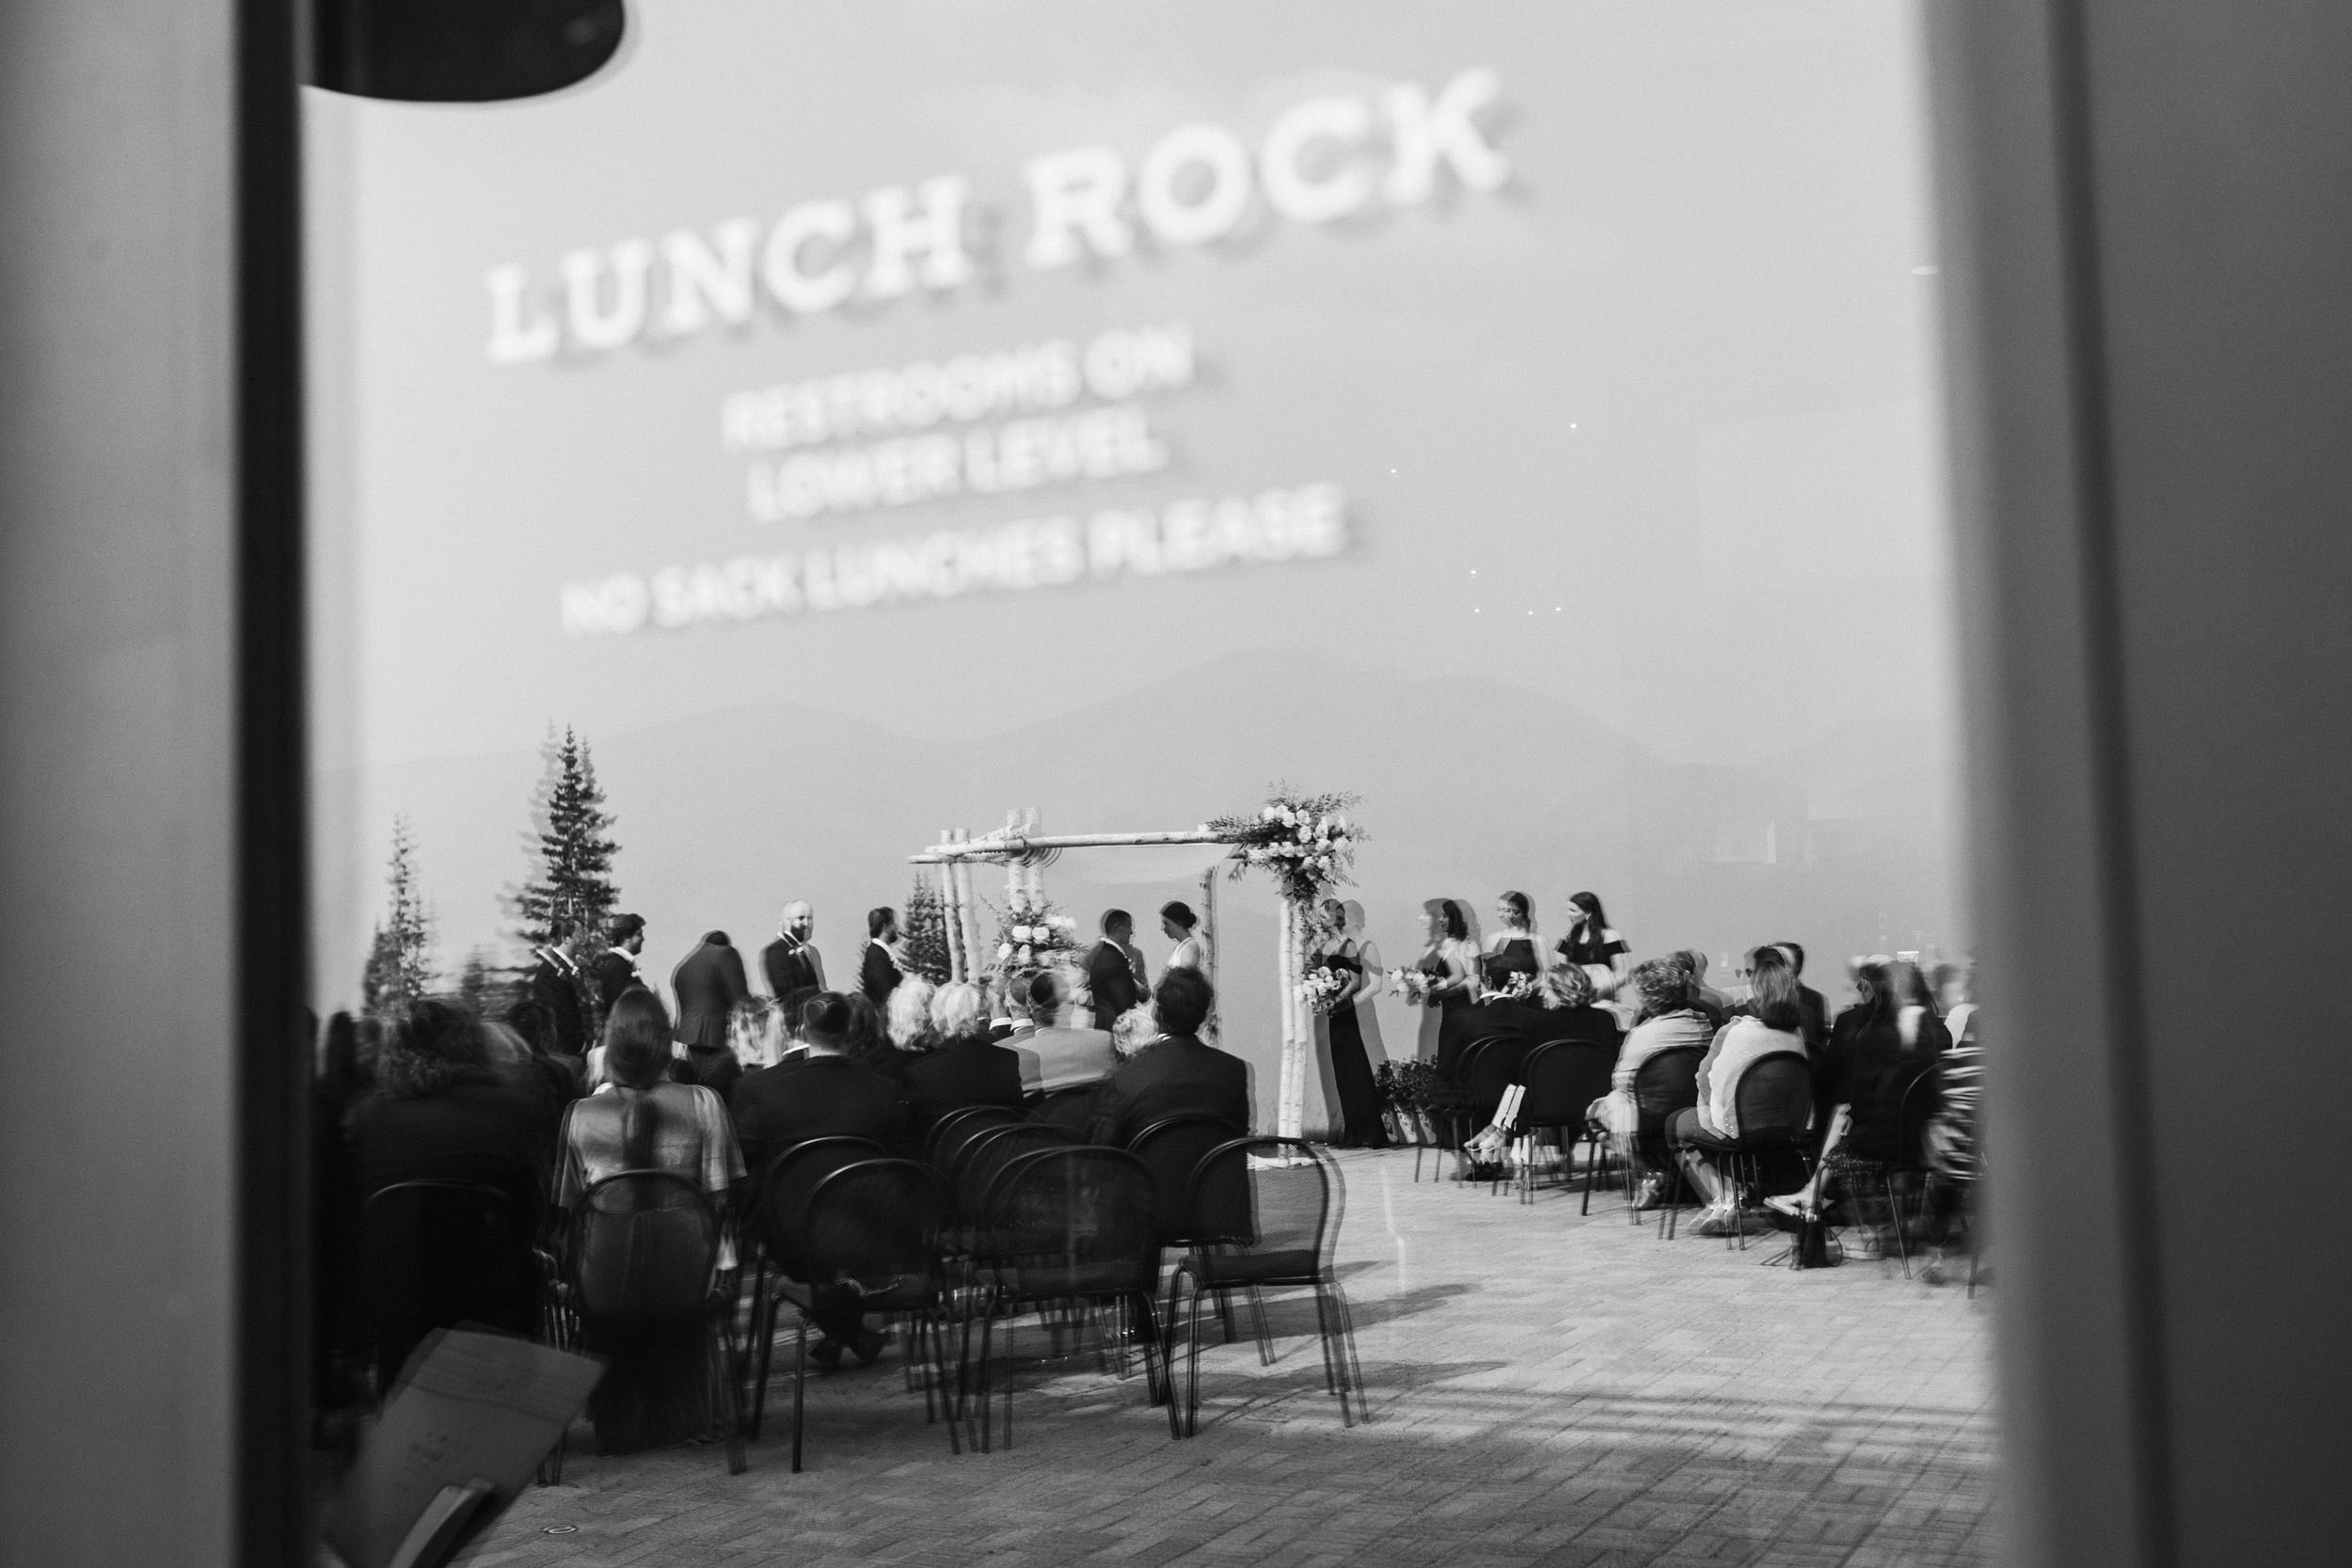 Lunch Rock Wedding Photos by Shea McGrath Photography